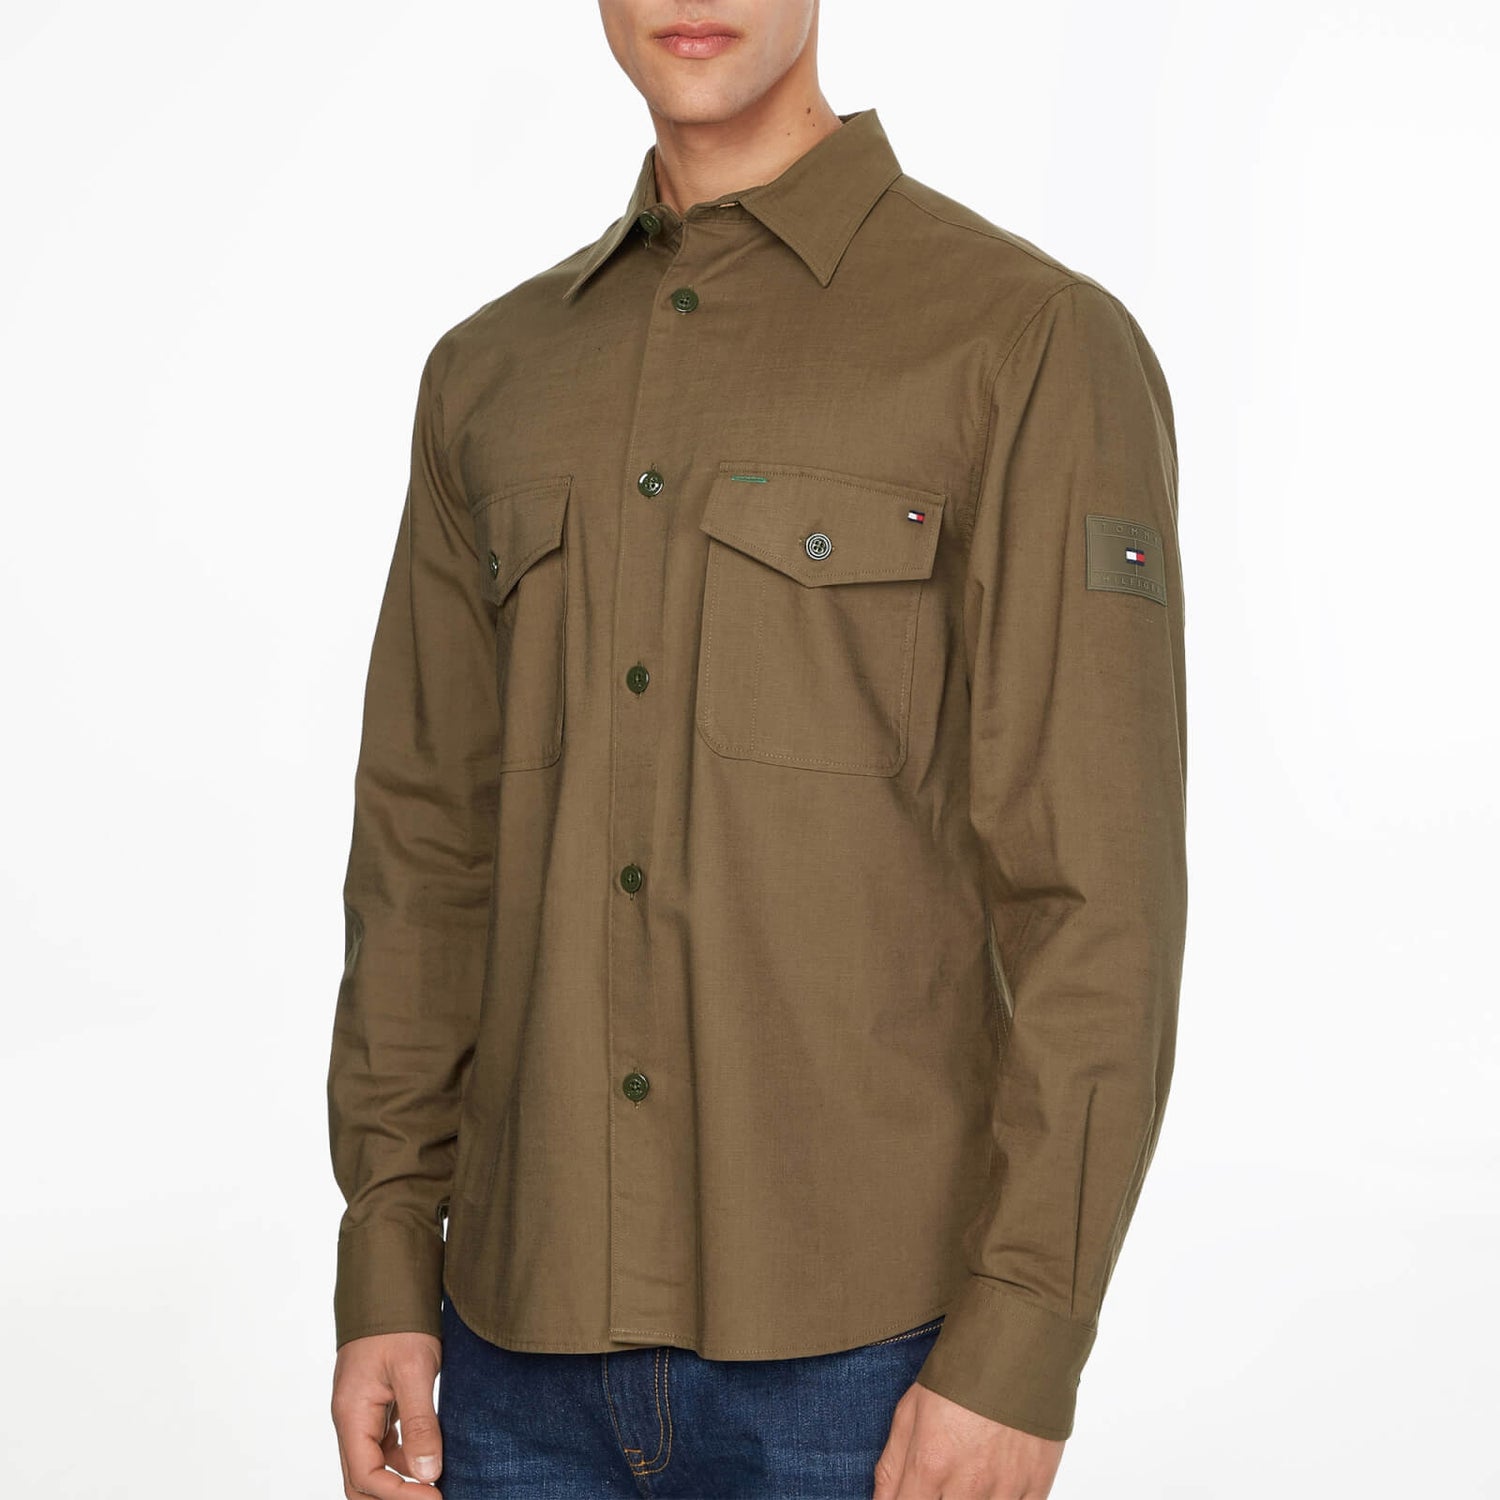 Tommy Hilfiger Men's Solid Utility Shirt - Faded Military - M